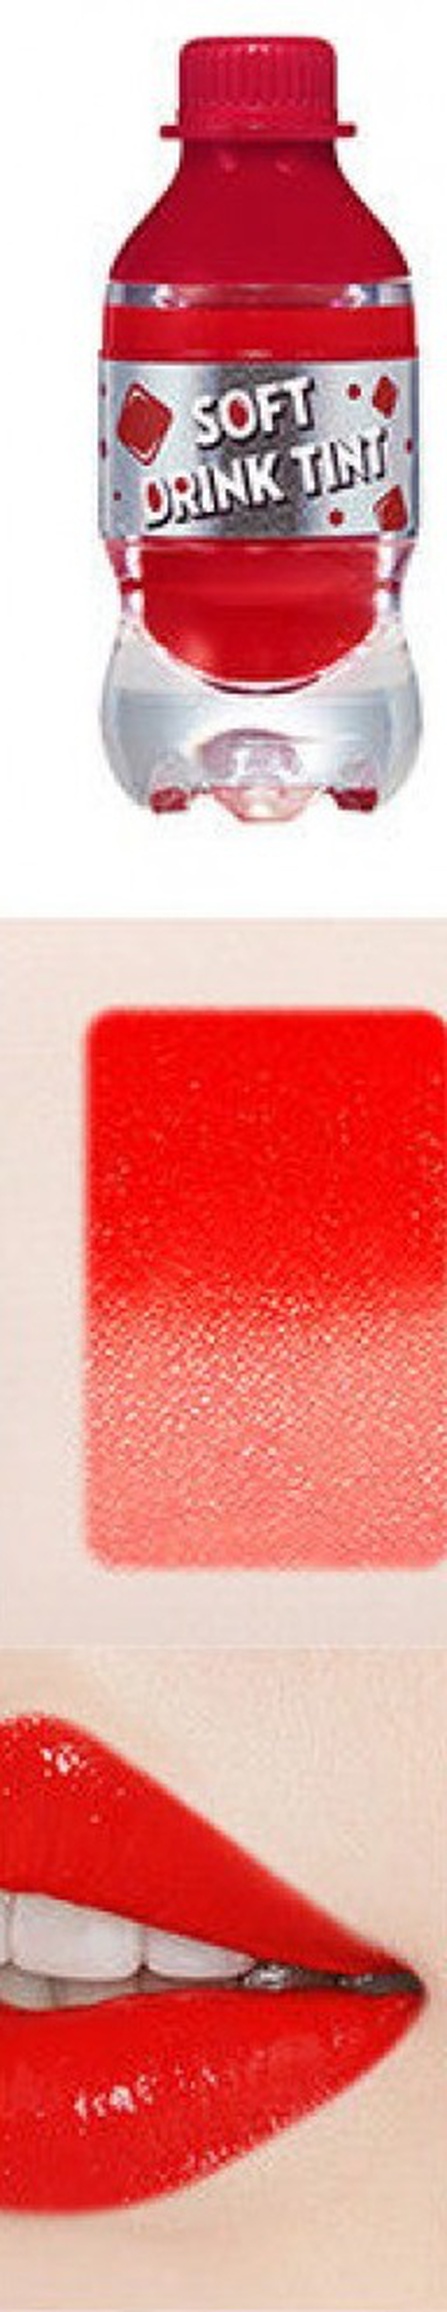 [Etude] Soft Drink Tint rd301 Red. Trushear zero red